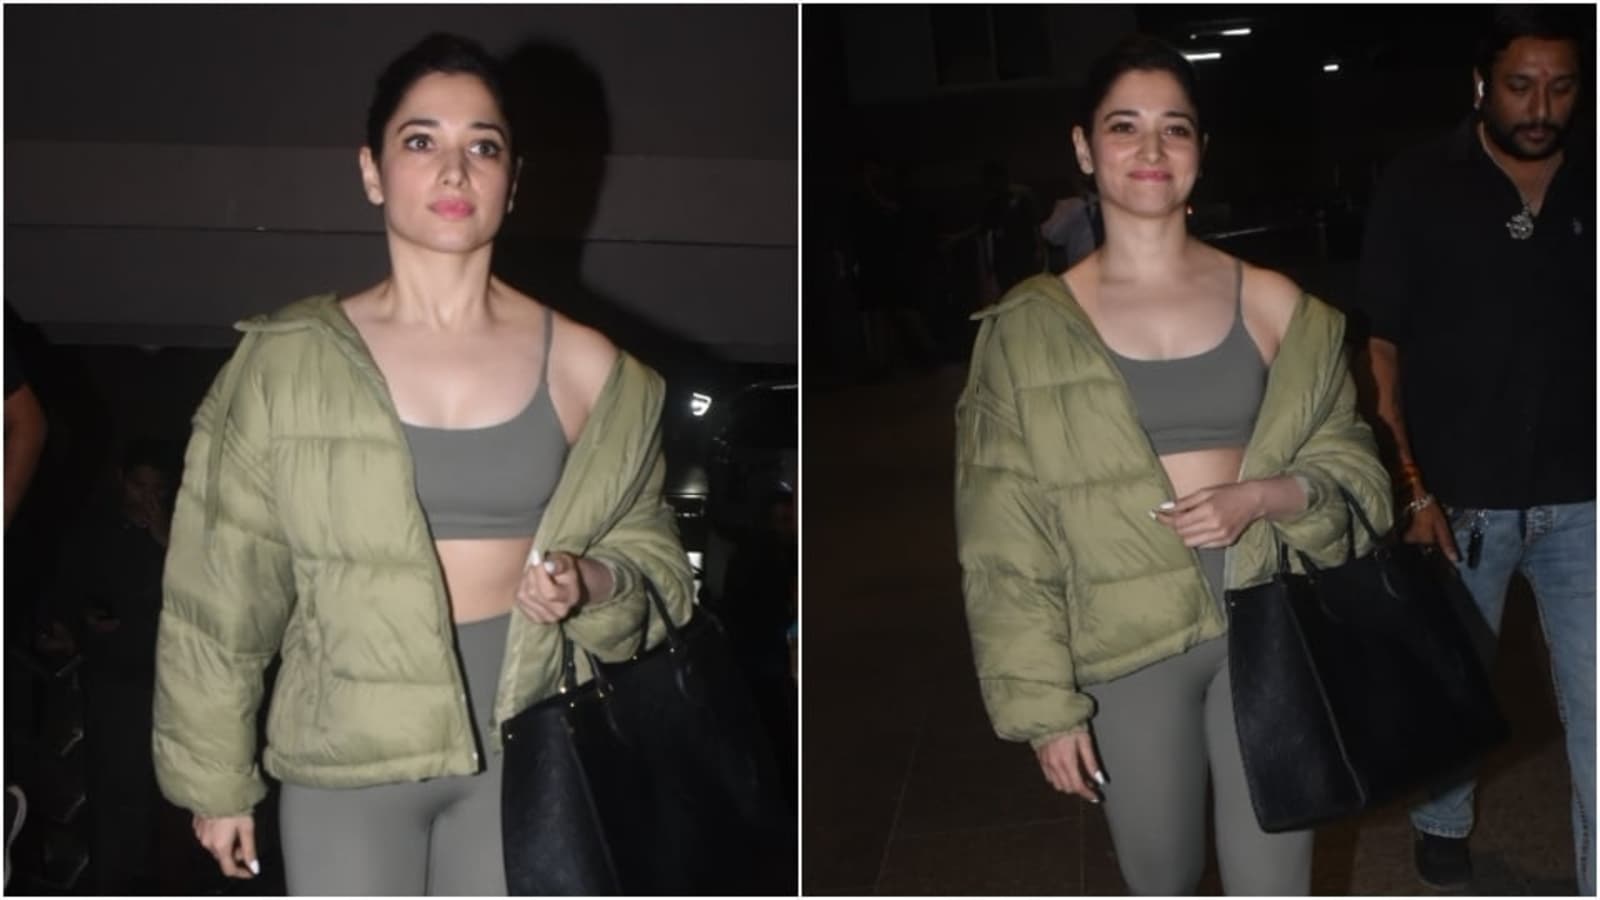 Tamannaah Bhatia’s athleisure style in grey sports bra, tights and puffer jacket shows how to glam up everyday looks